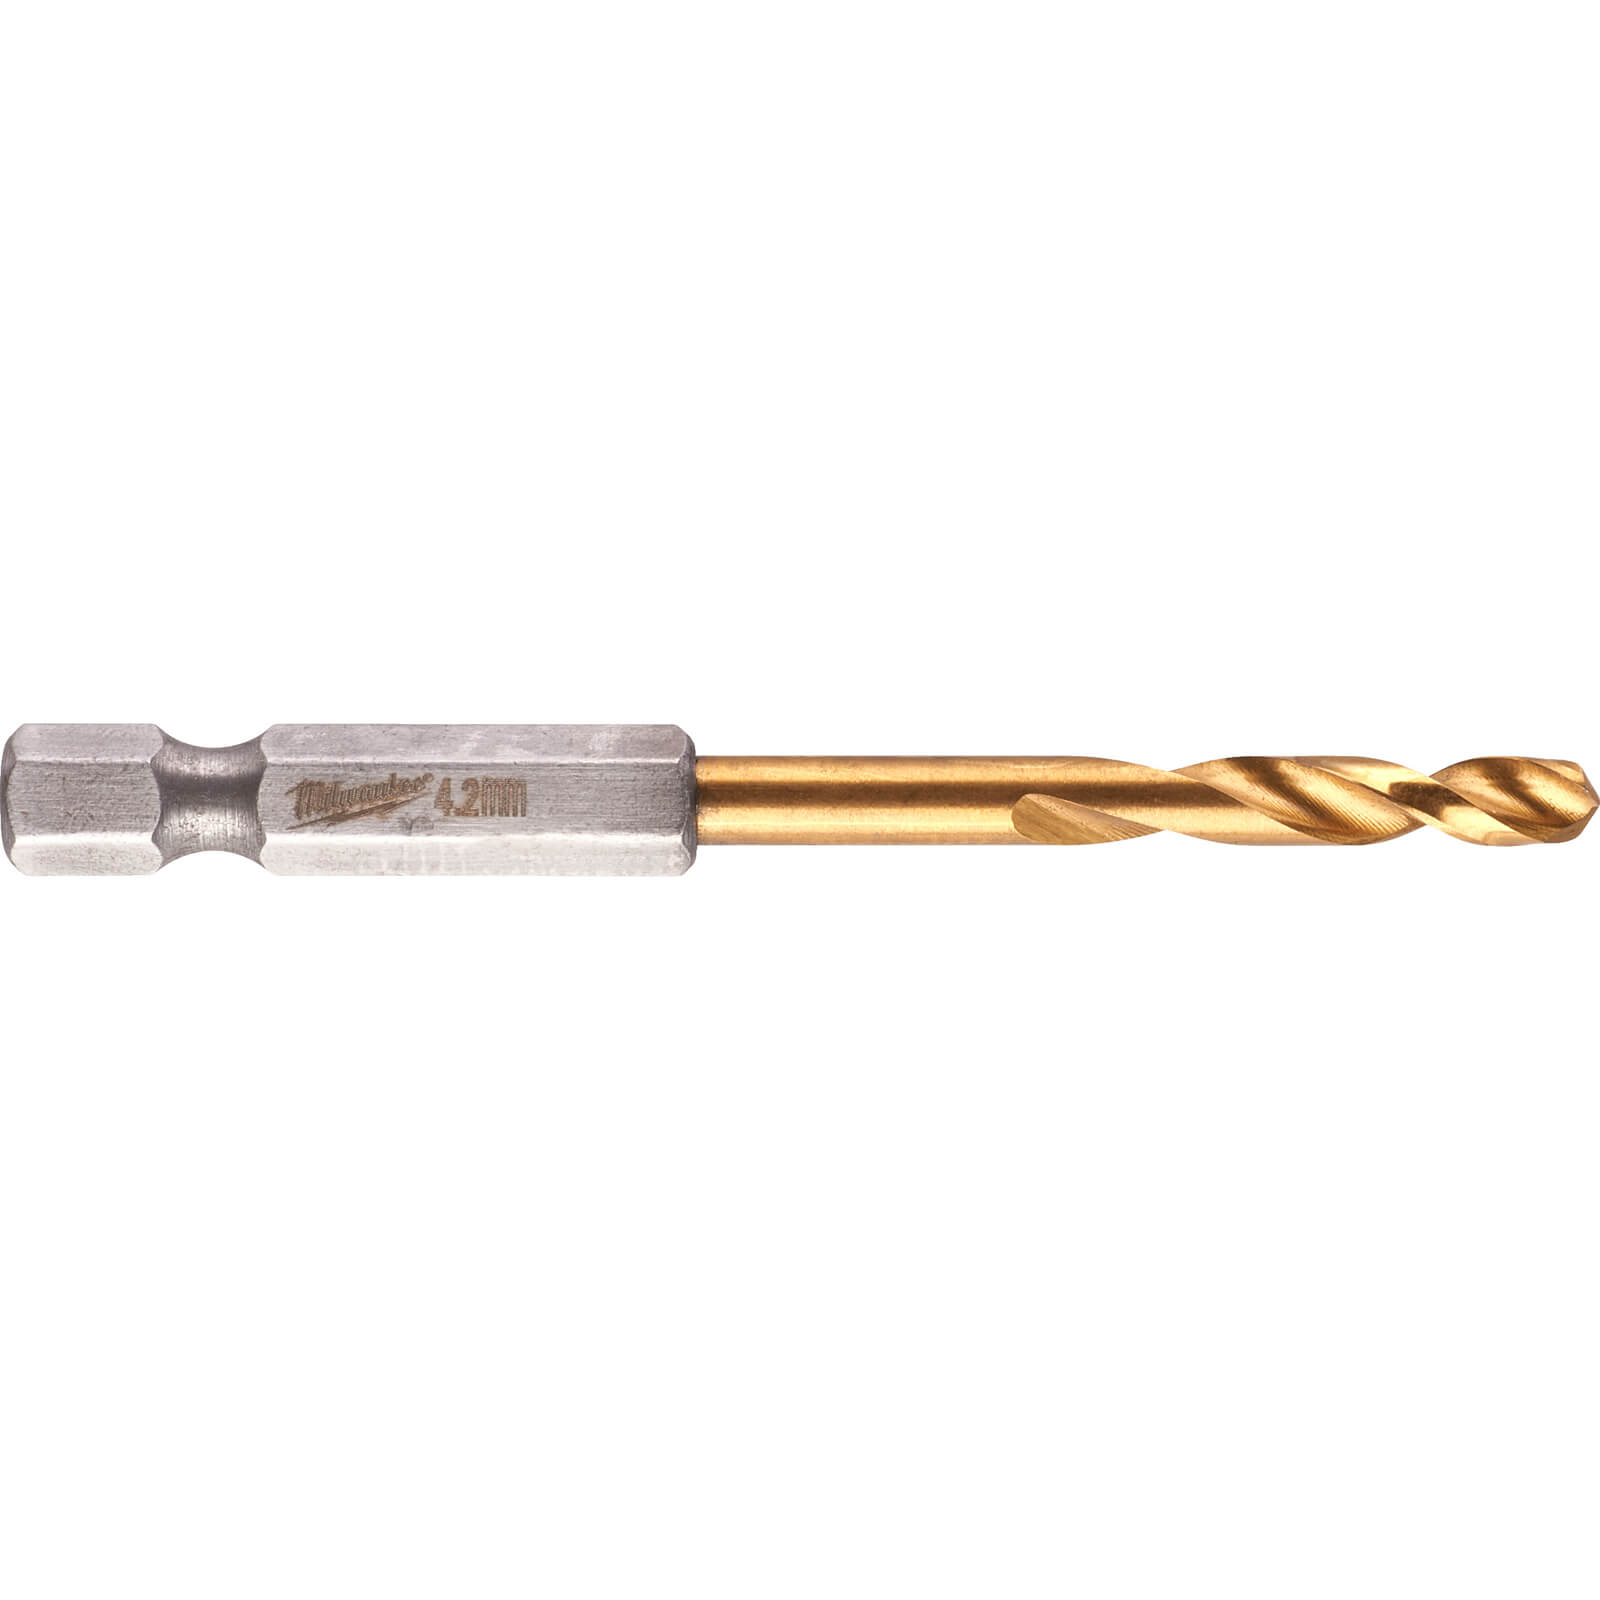 Image of Milwaukee HSS-G Shockwave Drill Bit 4.2mm Pack of 1